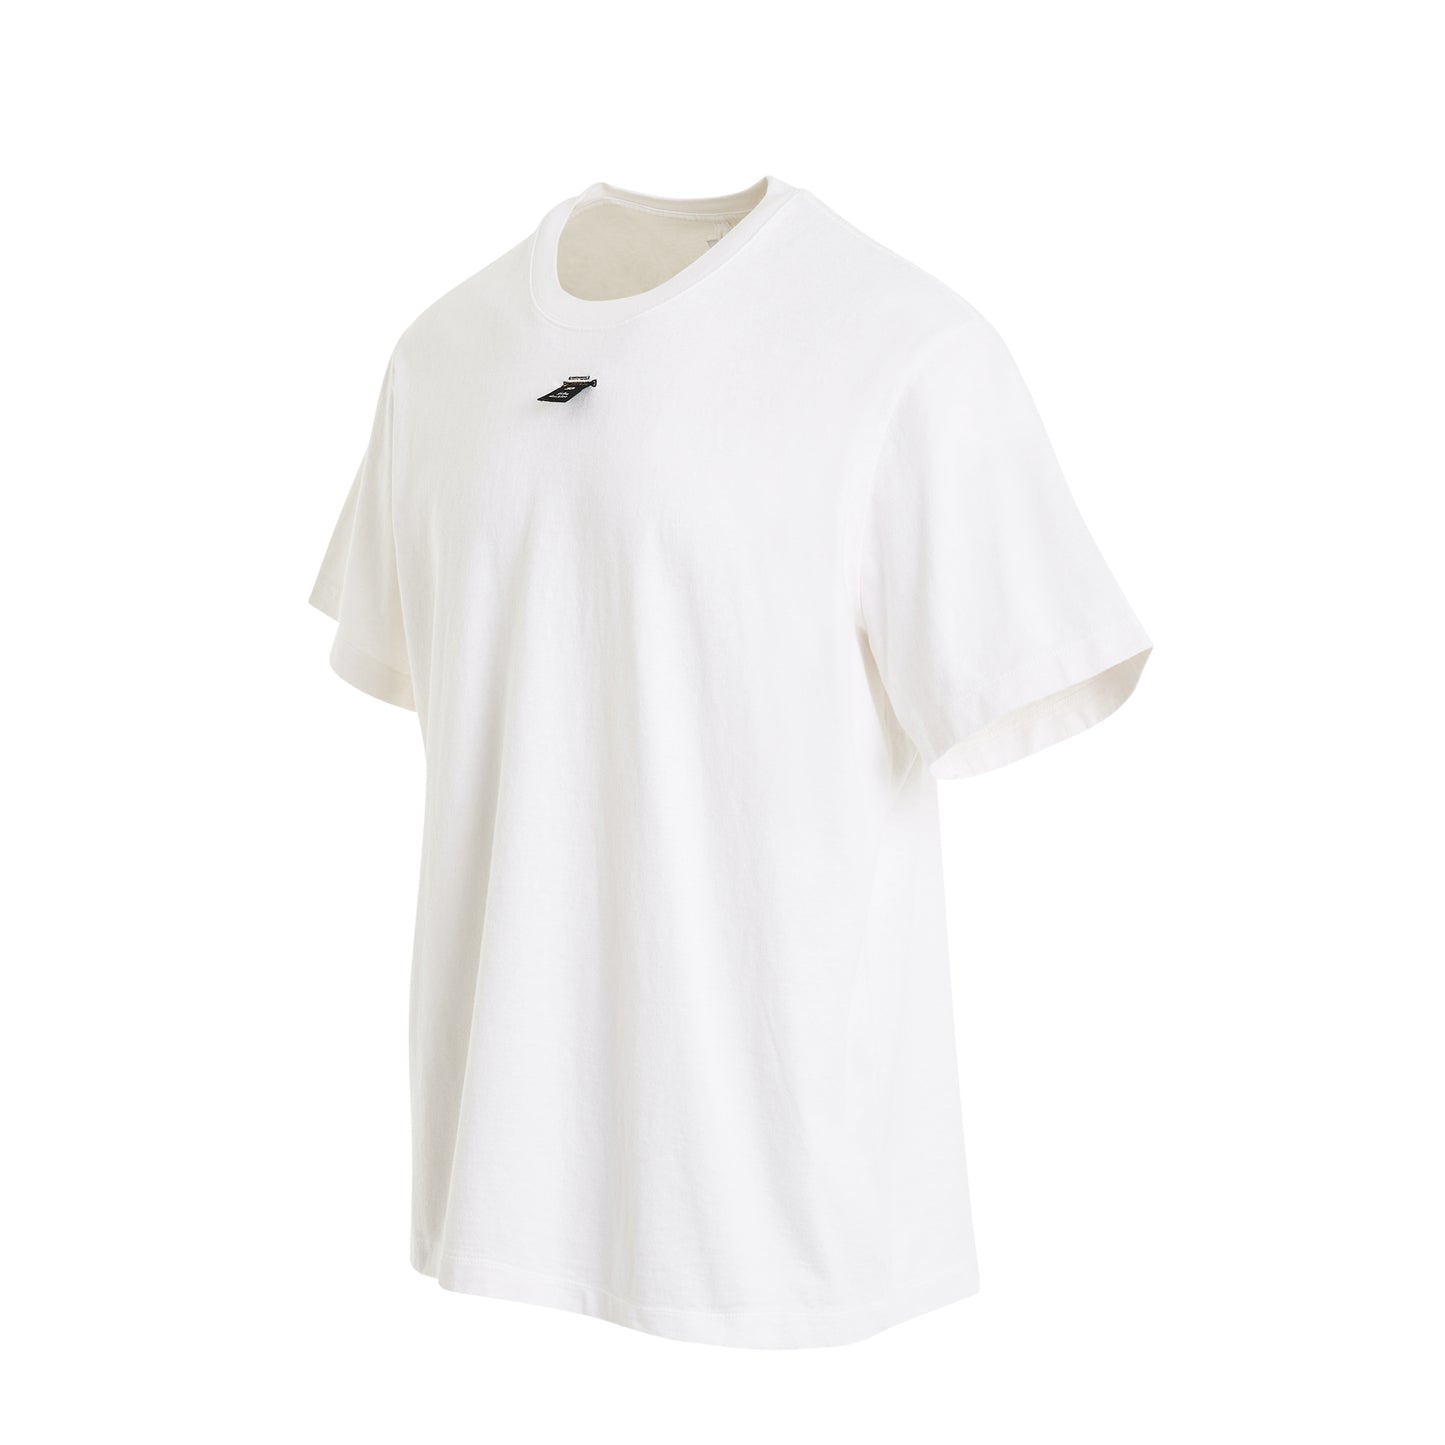 SD Card Embroidery T-Shirt in White